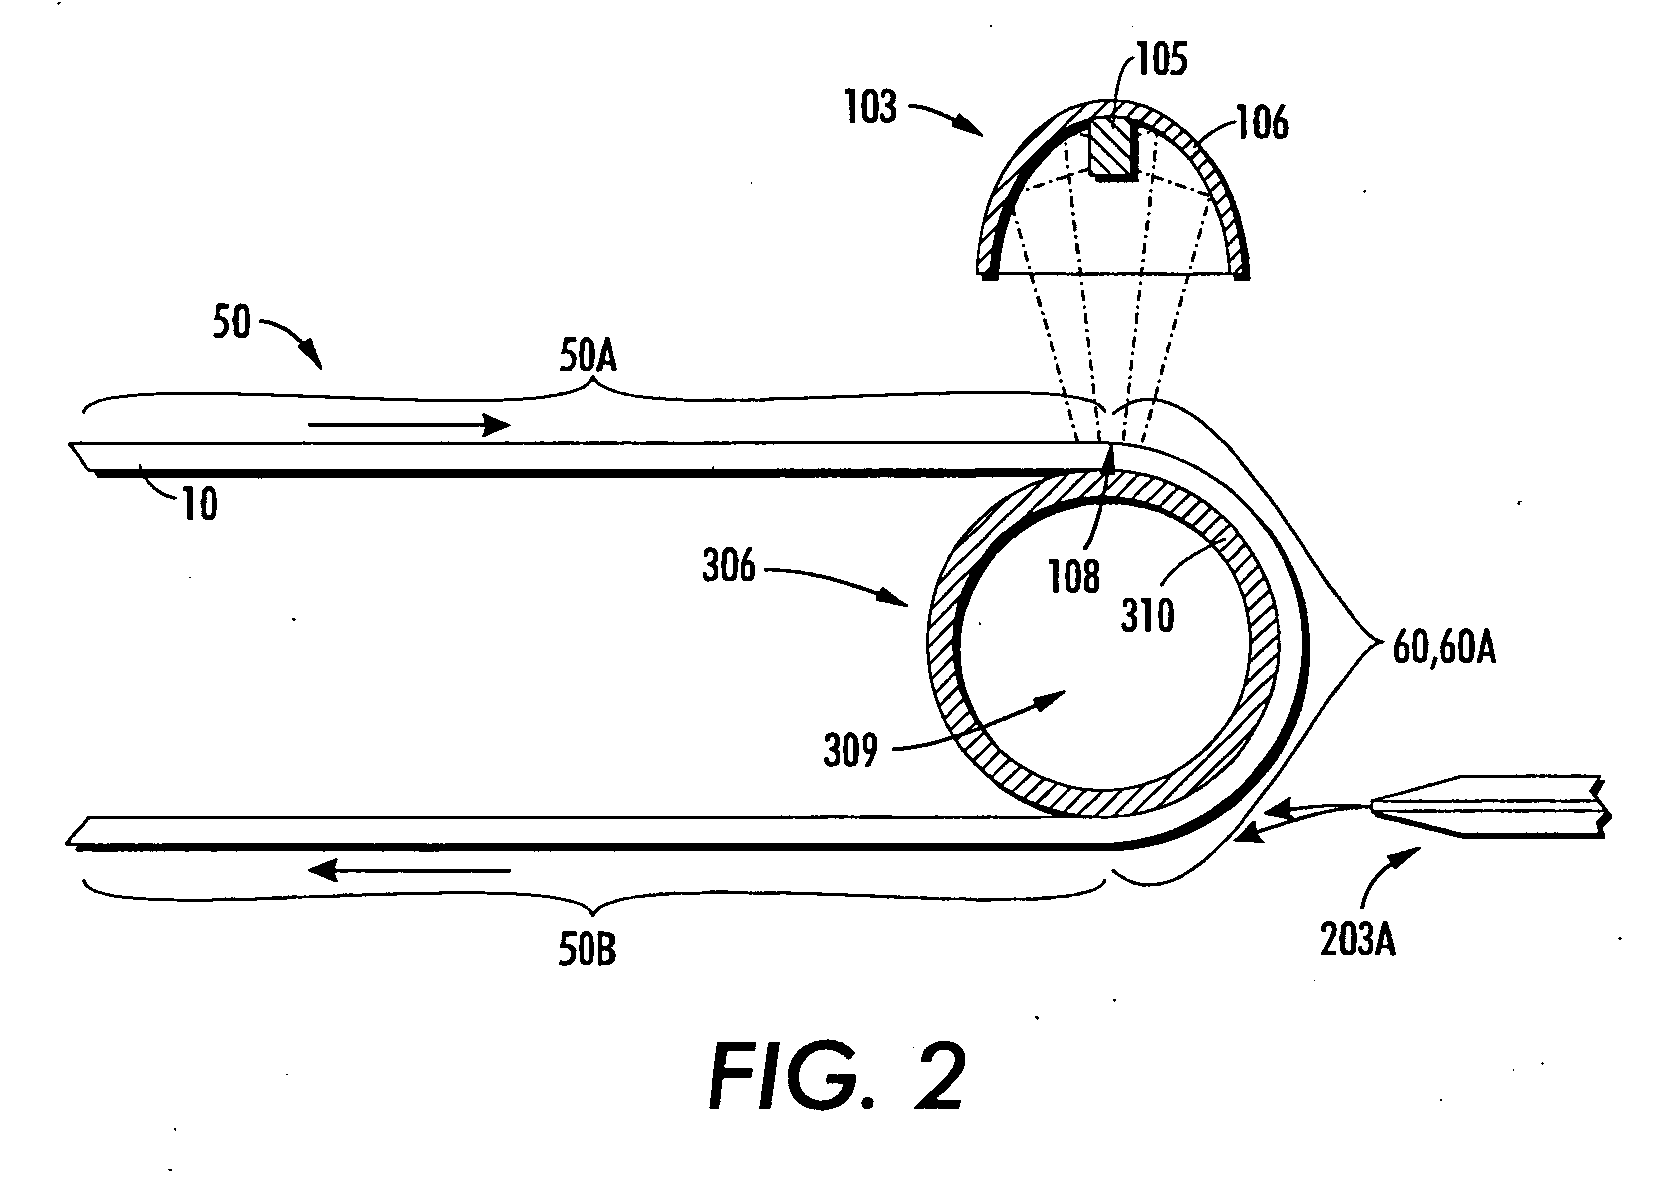 Apparatus and process for treating a flexible imaging member web stock